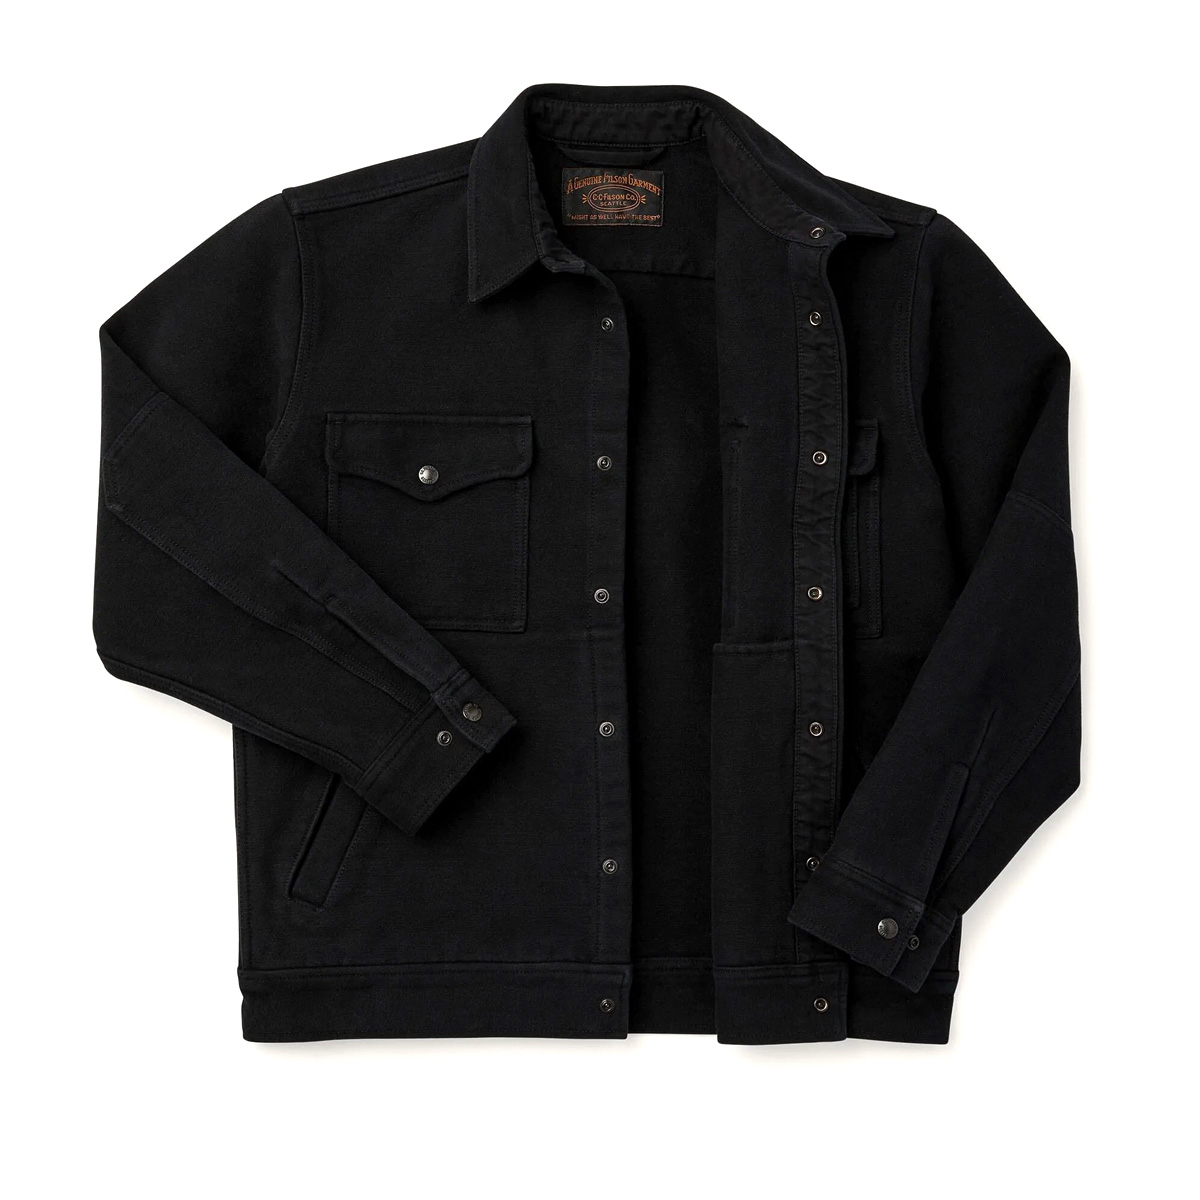 Filson Beartooth Camp Jacket Navy/Black to fend off chilly fall days in ...